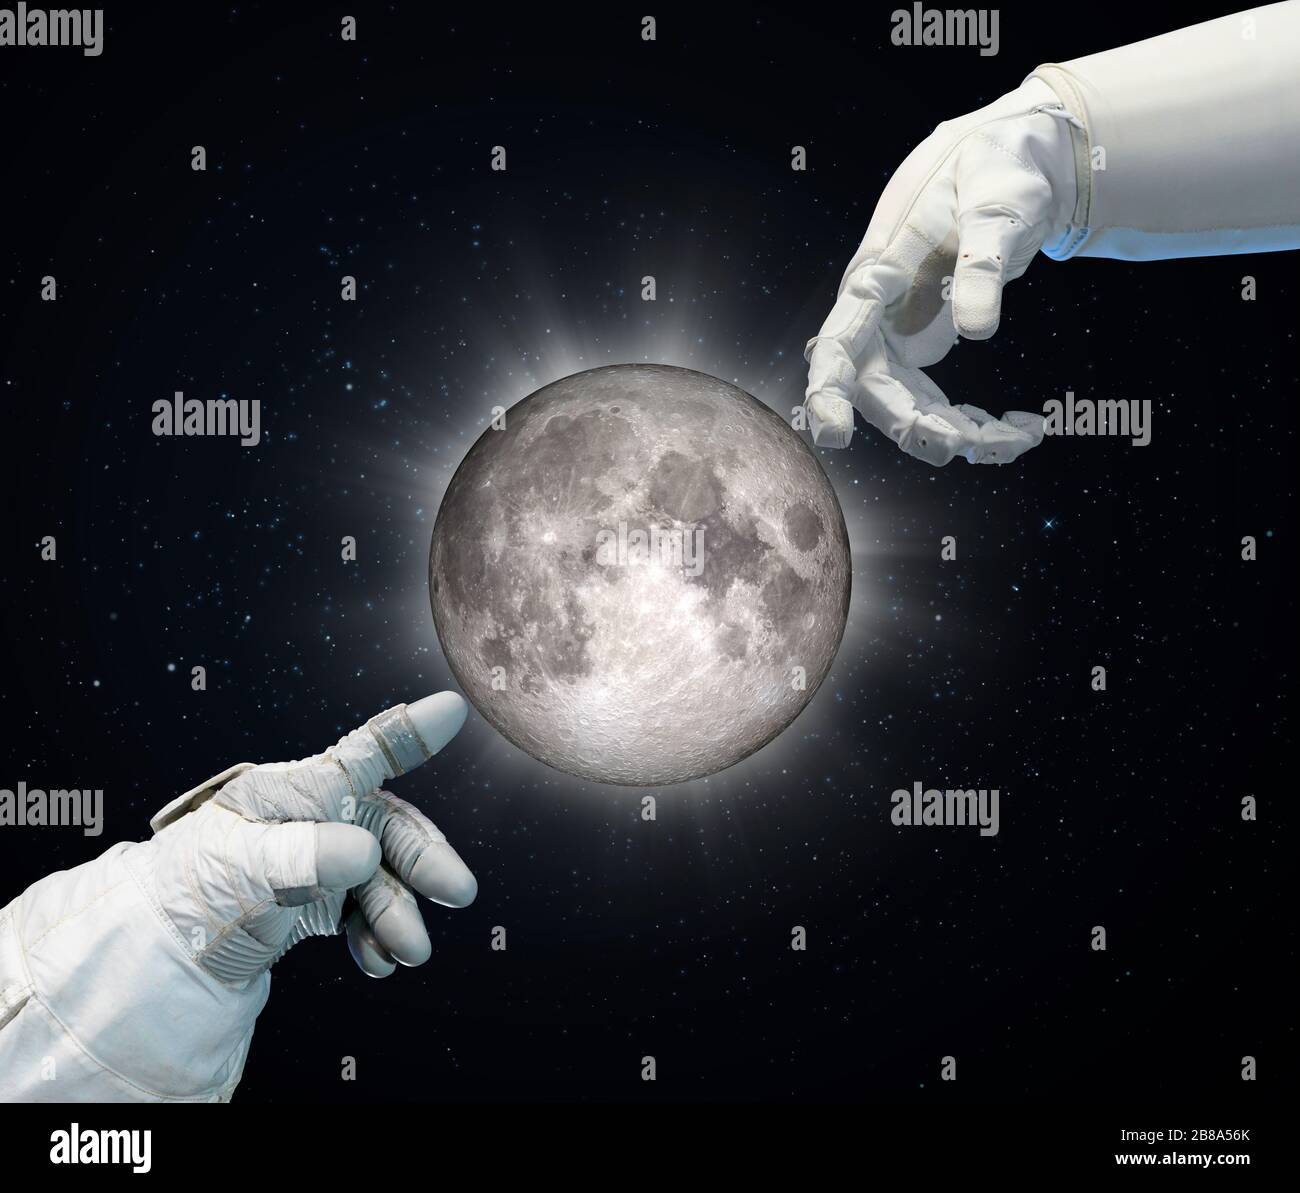 Astronaut and robotic hand in contact. Elements of this image furnished by NASA. Stock Photo